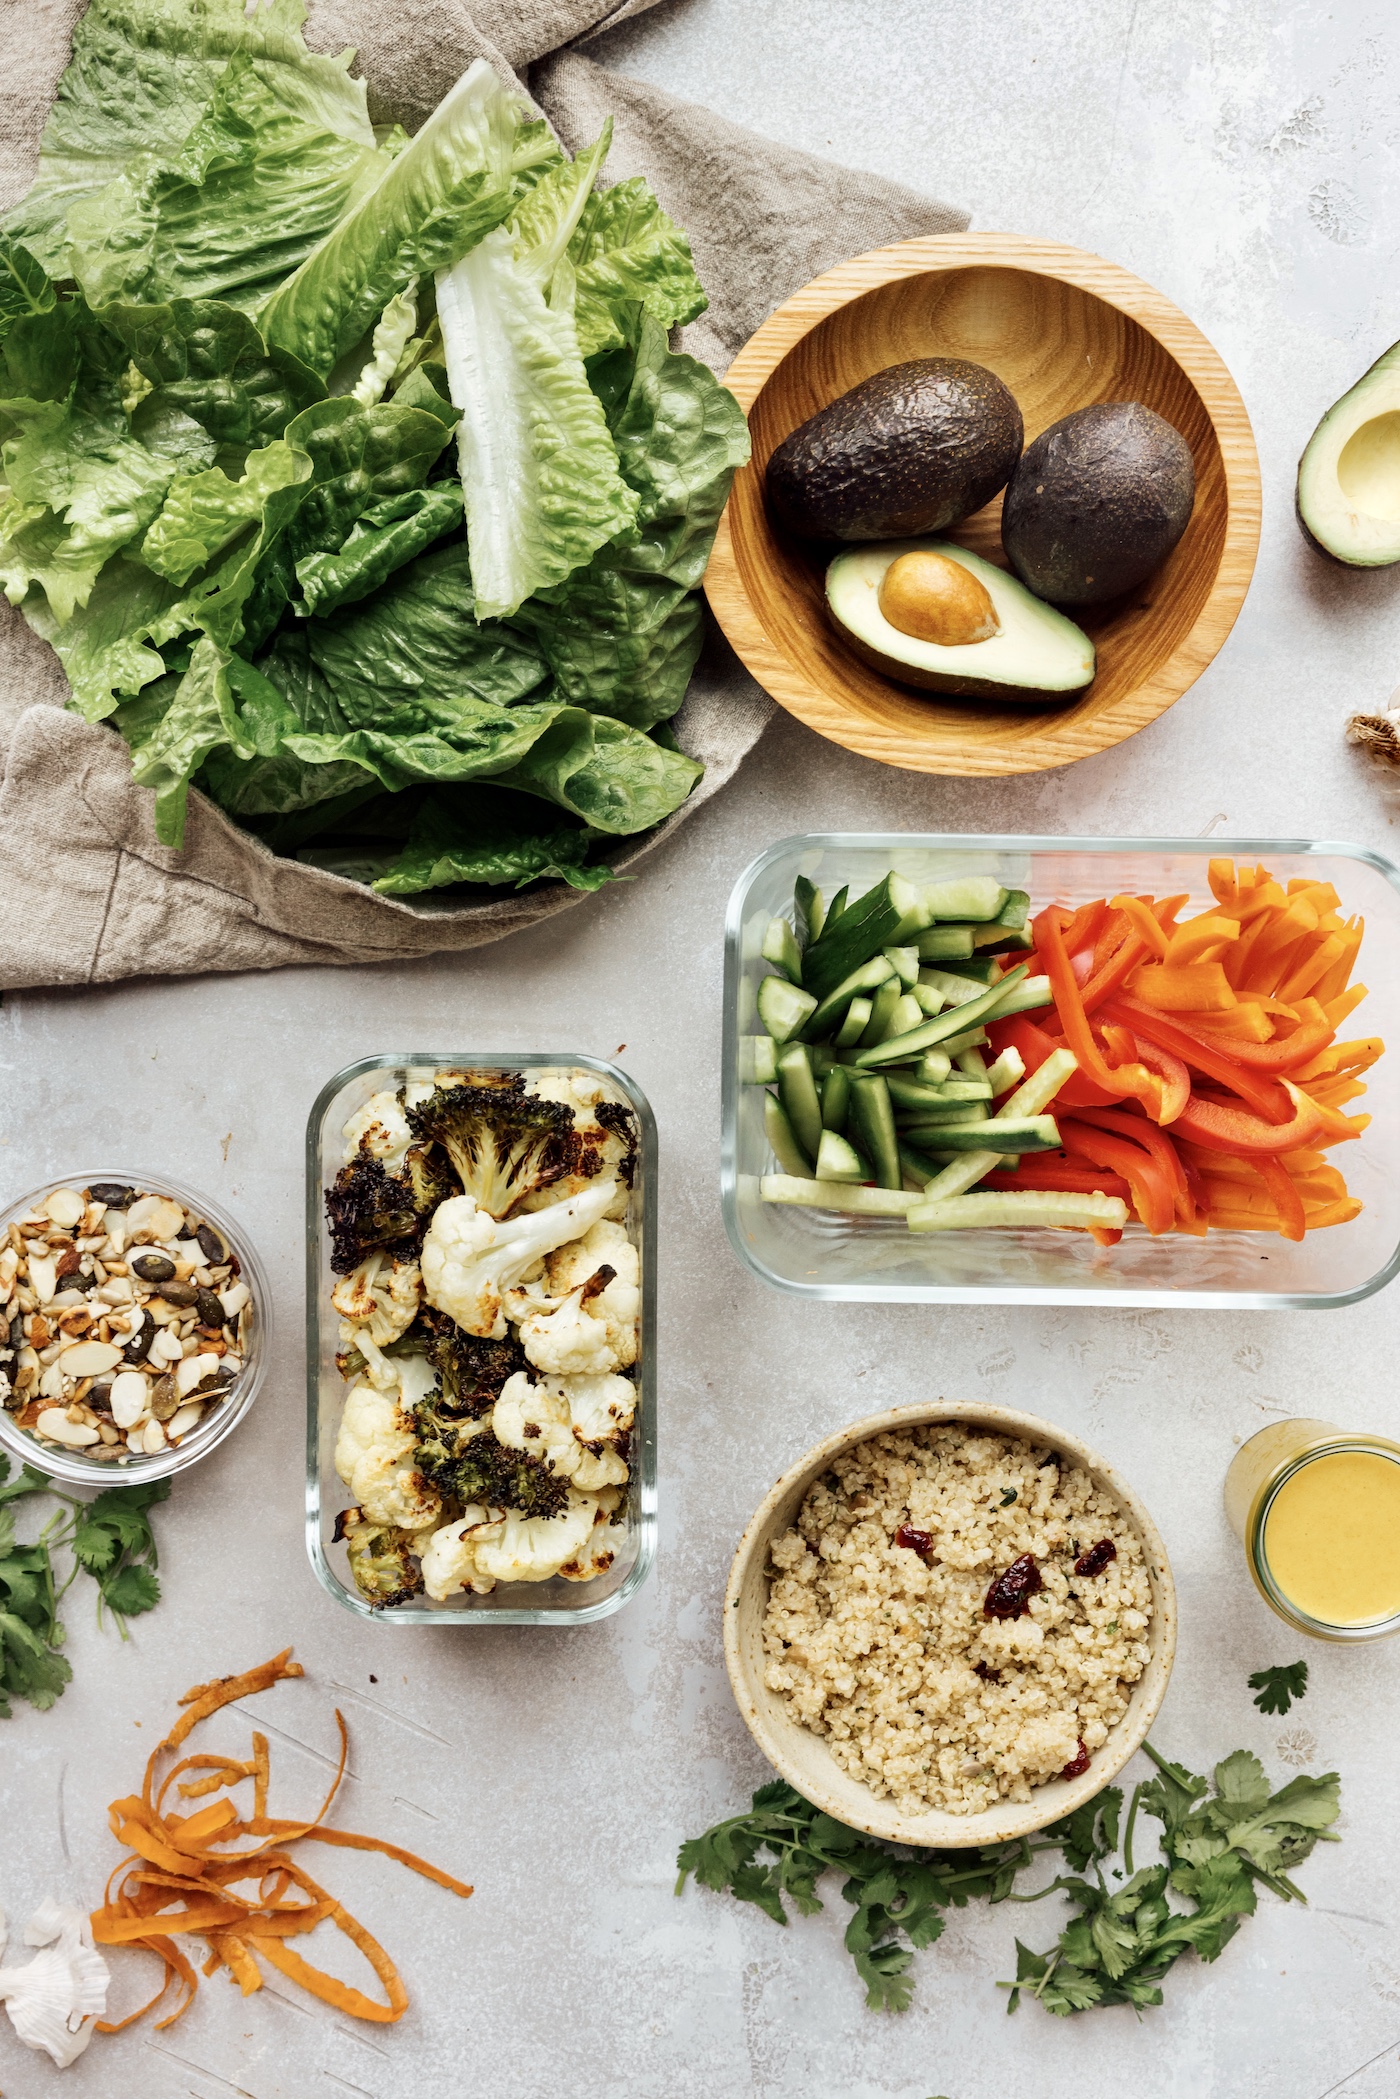 9 Simple Meal Prep Suggestions for Learners